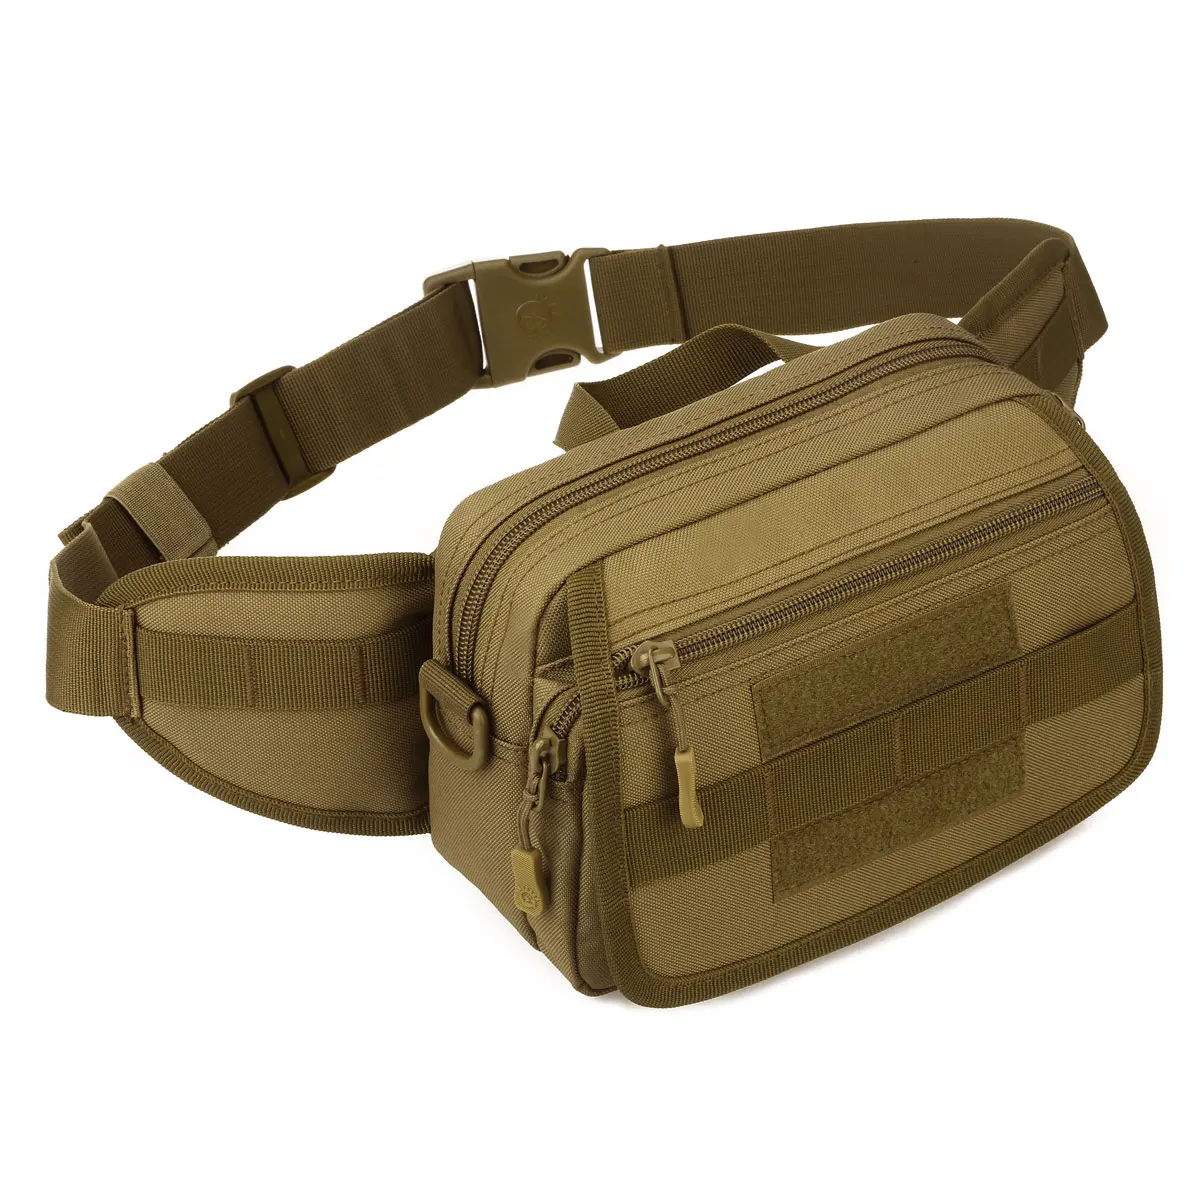 

Military Tactical Molle Waist Bags Multifunction Camo 6 Inches Phone Messenger Shoulder Outdoor Sports Crossbody, Multi color